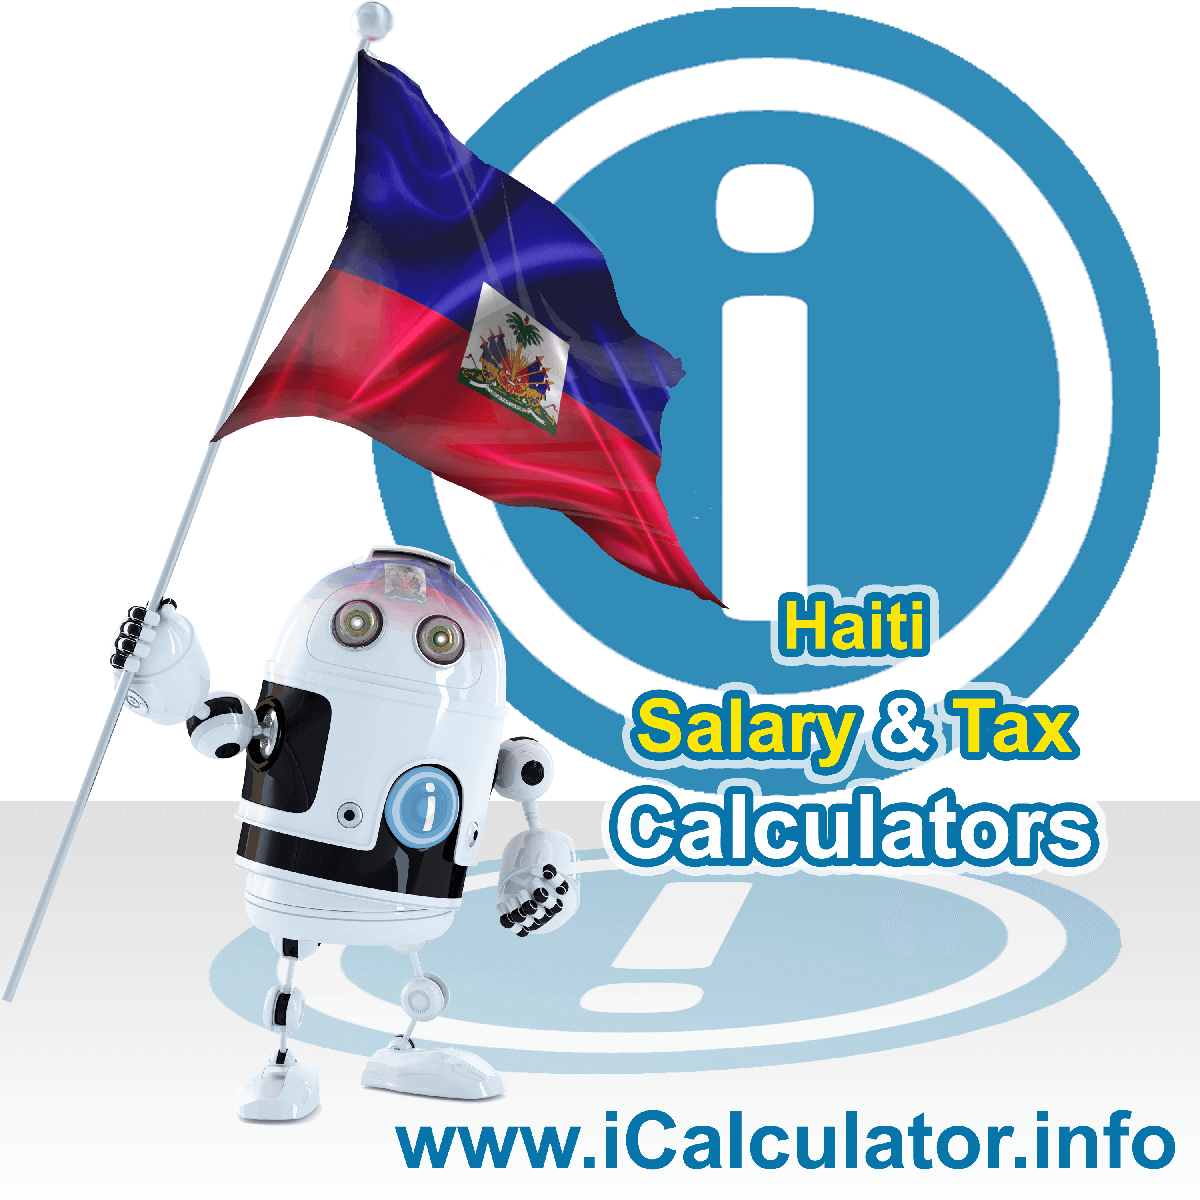 Haiti Tax Calculator. This image shows the Haiti flag and information relating to the tax formula for the Haiti Salary Calculator